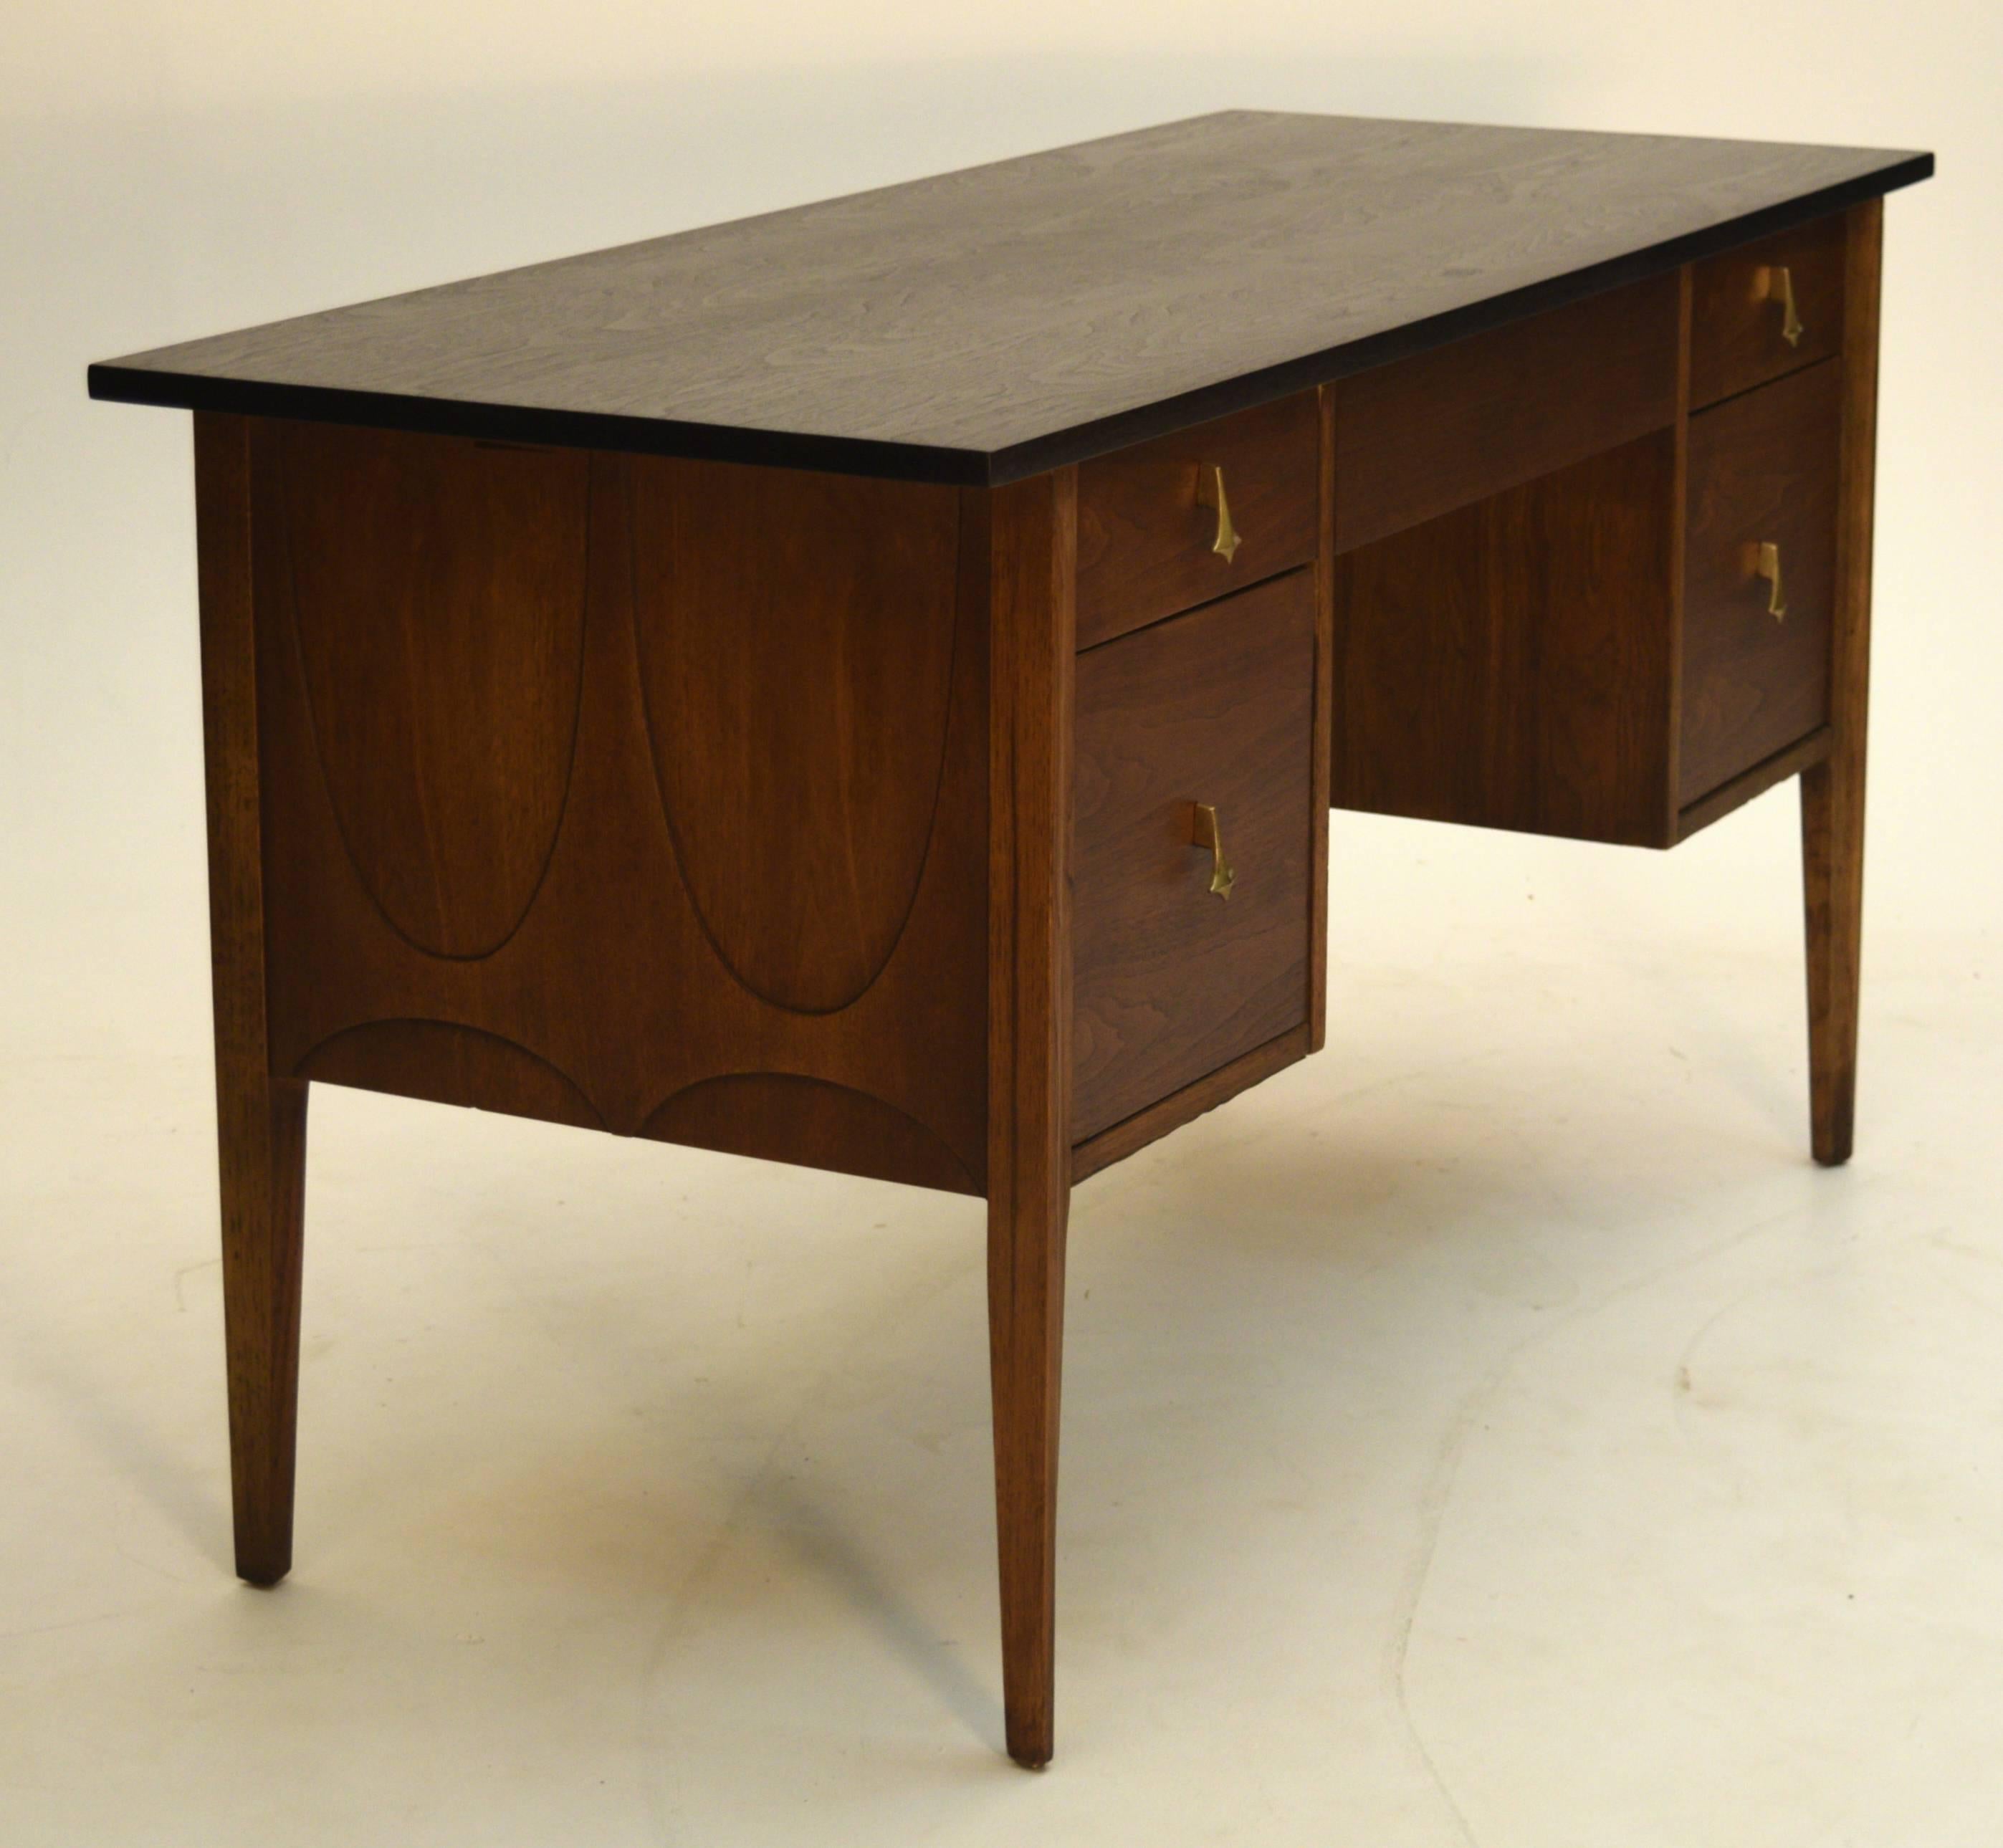 A beautiful walnut desk by the Broyhill company from their Brasilia Premier line featuring a central finger pull drawer, 2 pencil drawers as well 2 file drawers. Complete with vanity screen in rattan and the Classic Oscar Niemeyer pattern the sides.